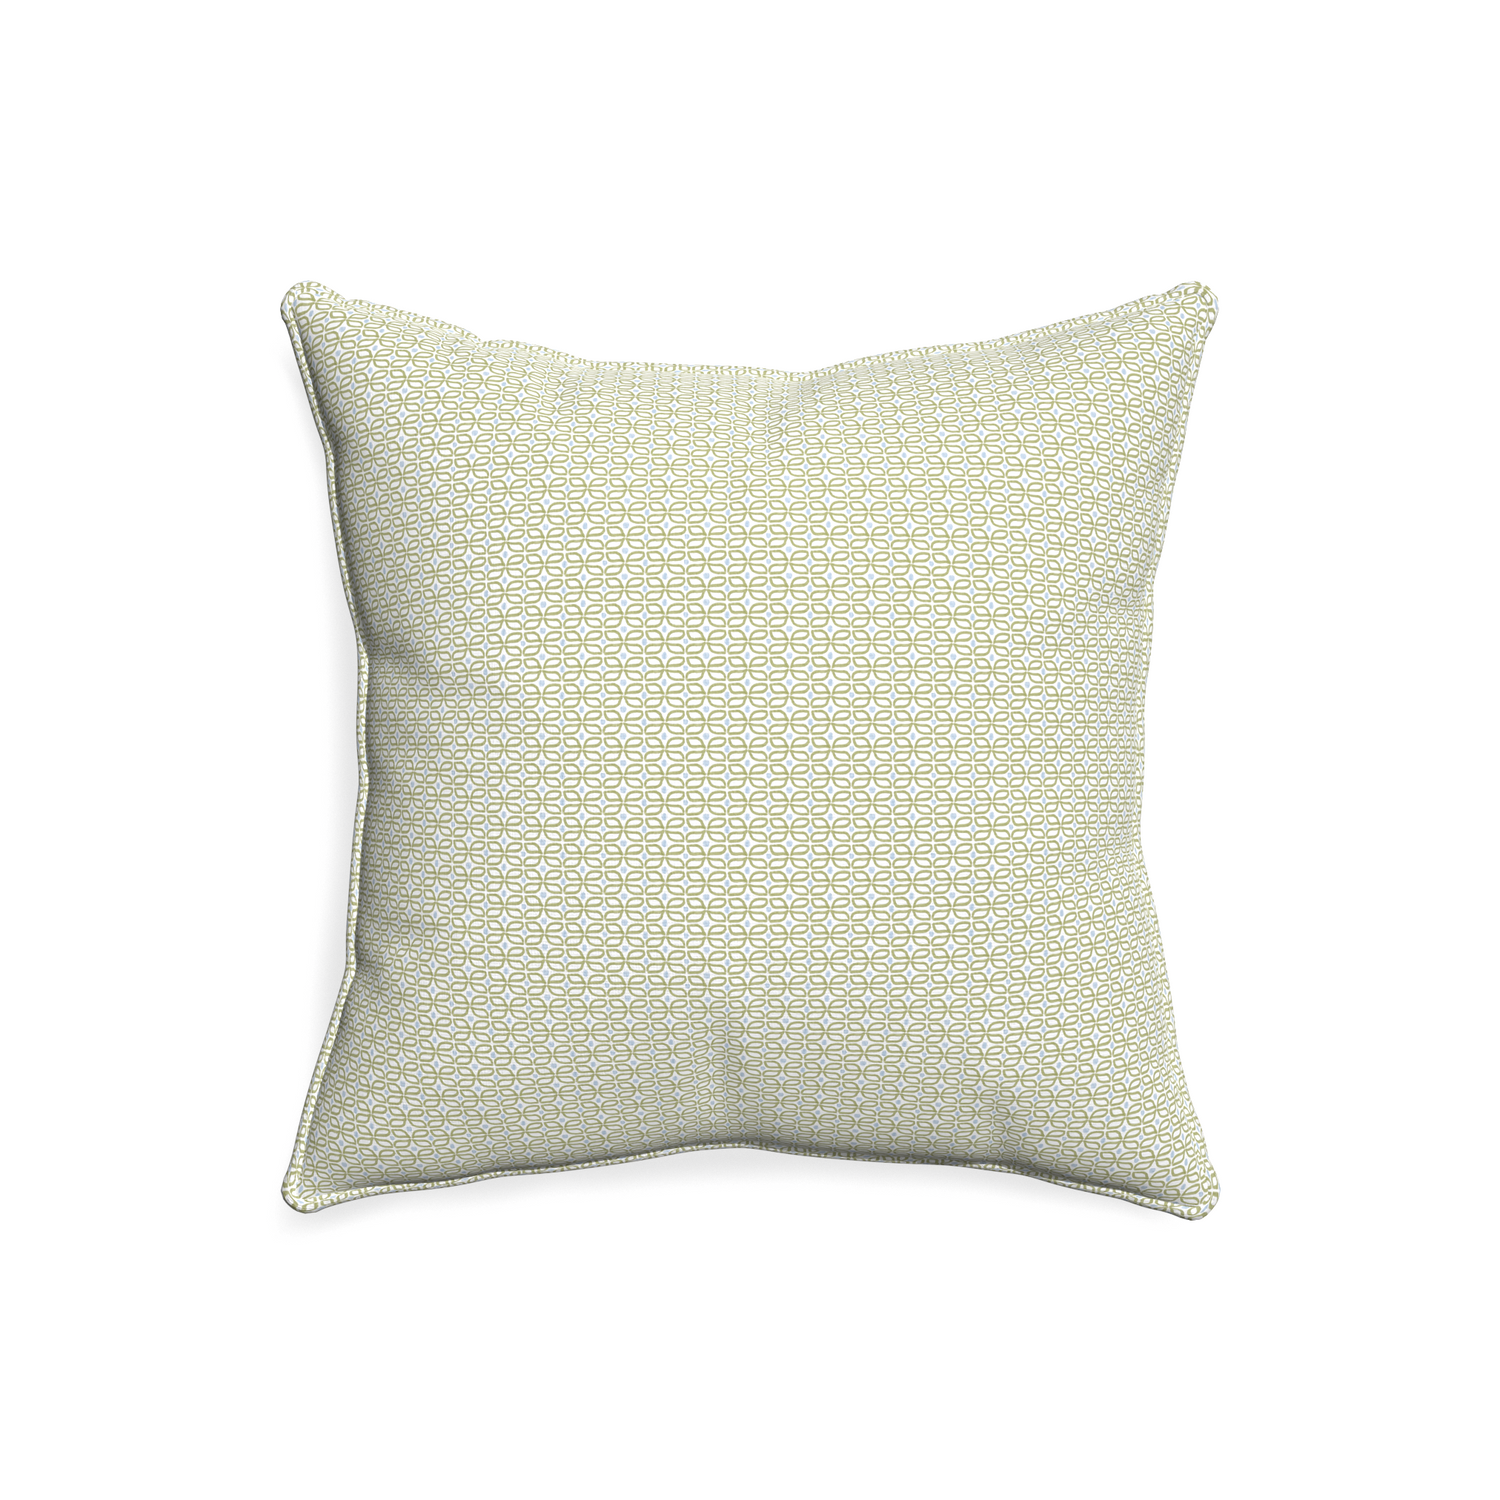 20-square loomi moss custom pillow with l piping on white background